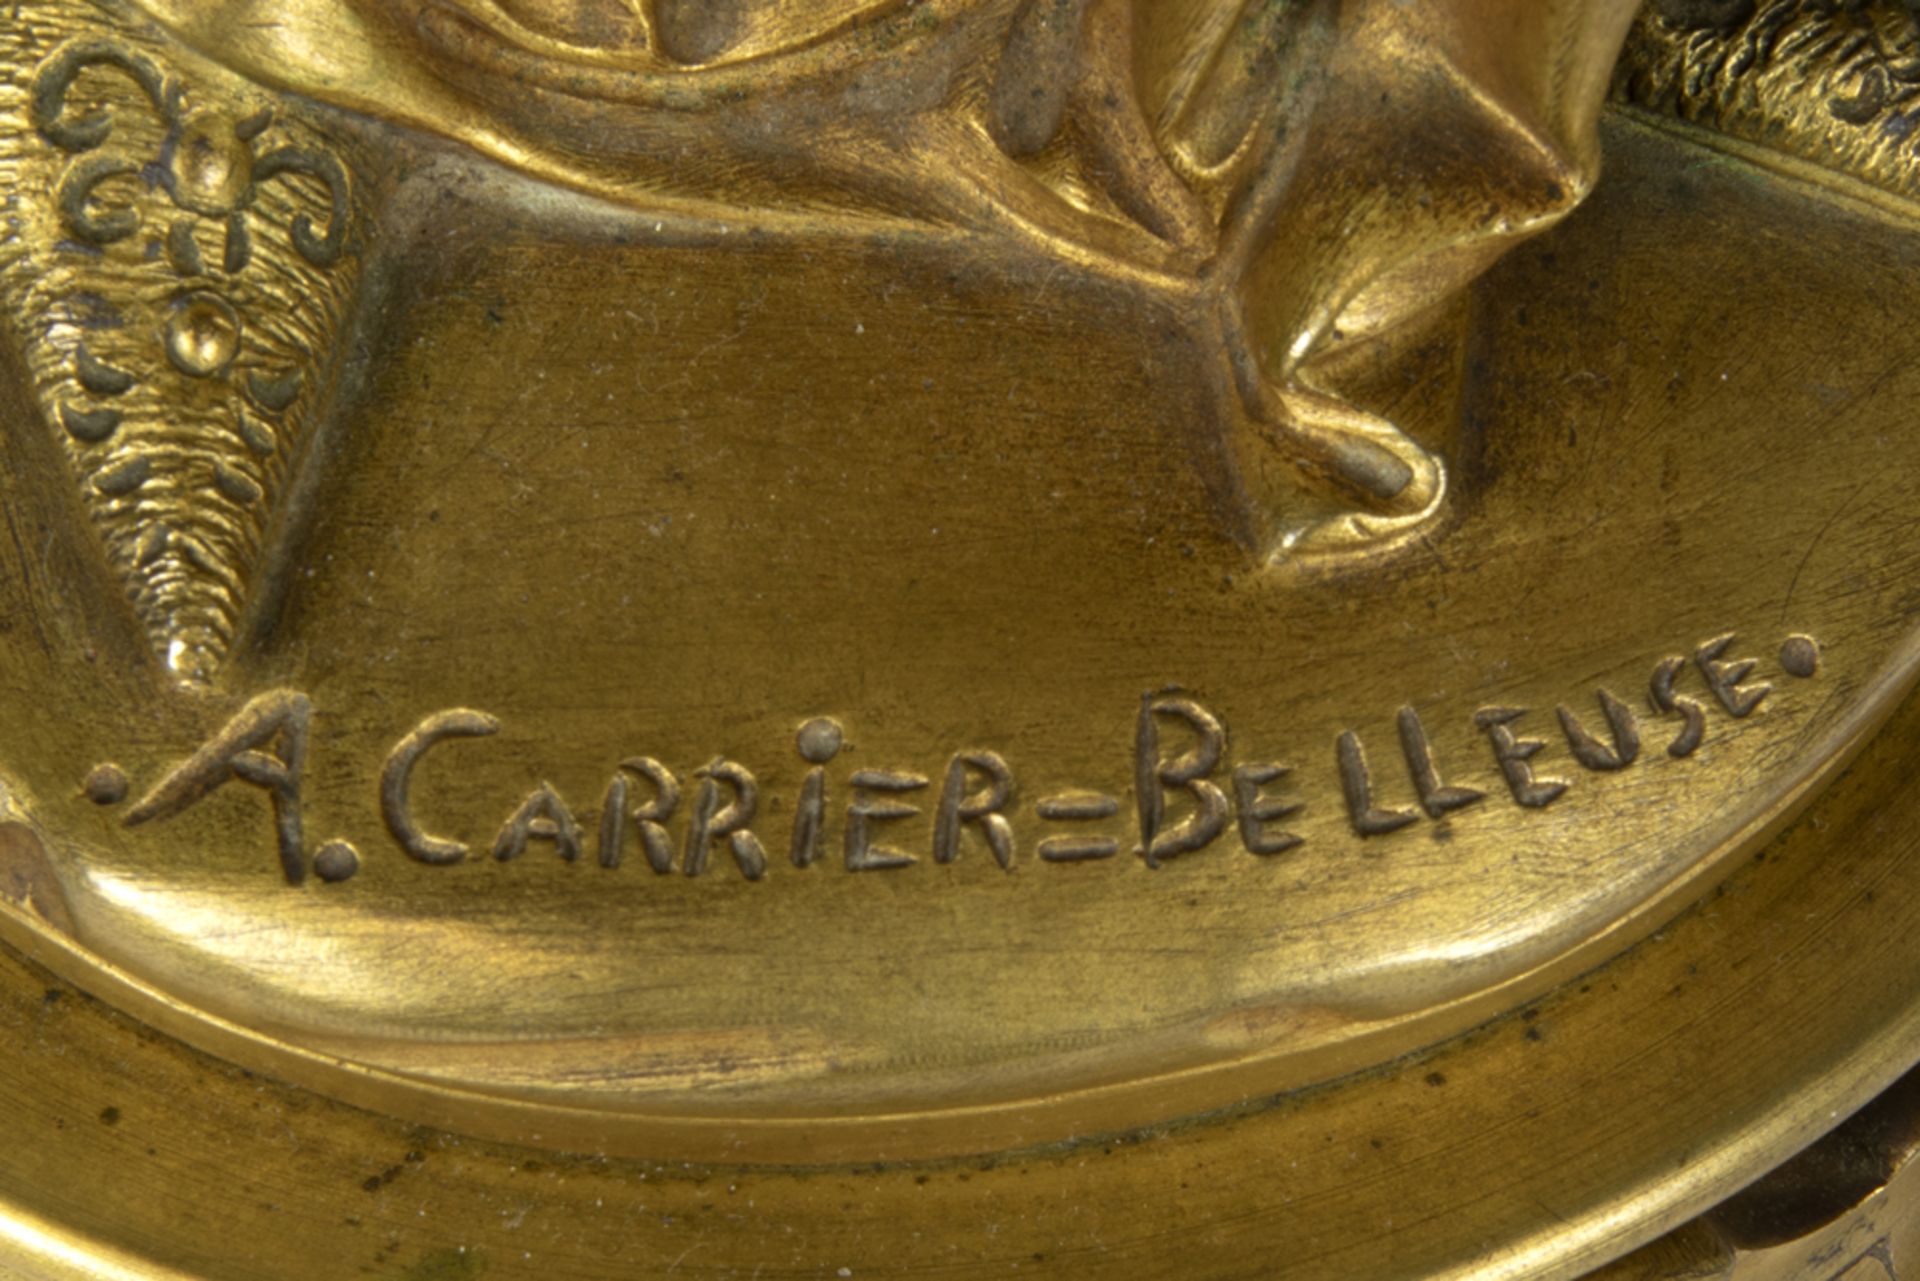 19th Cent.Carrier-Belleuse signed chryselephantine sculpture in gilded bronze and ivory - with - Image 5 of 7